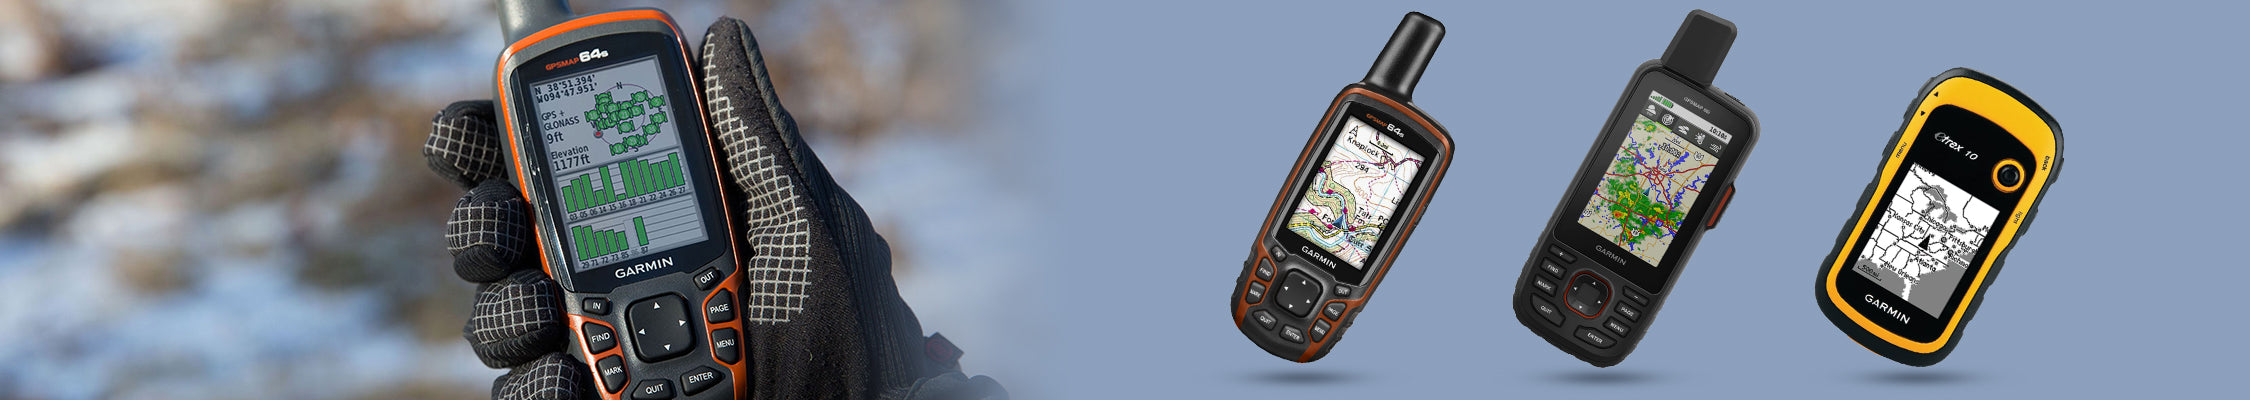 Handheld GPS Systems